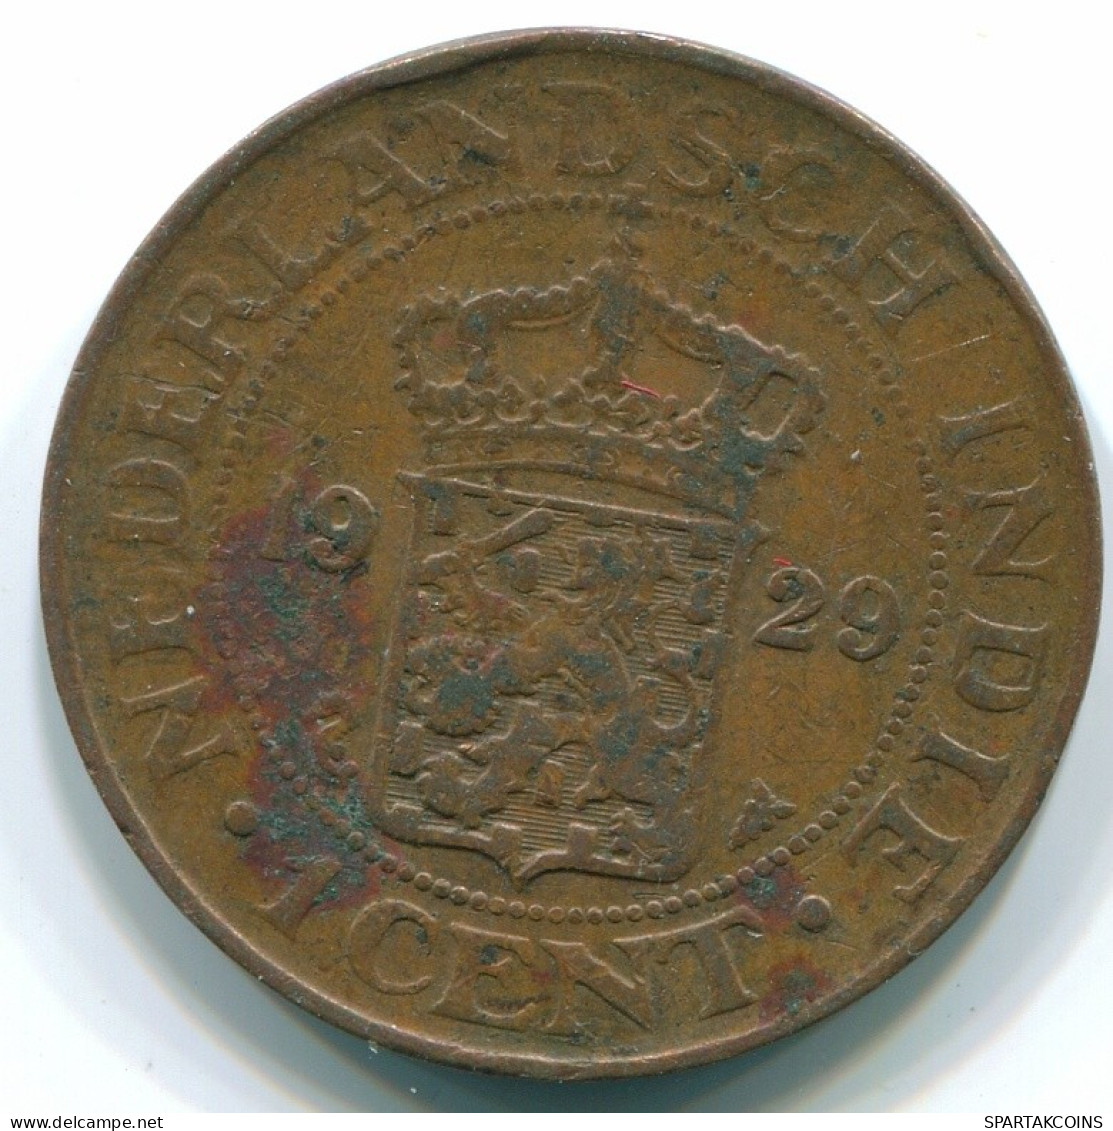 1 CENT 1929 NETHERLANDS EAST INDIES INDONESIA Copper Colonial Coin #S10103.U.A - Indes Neerlandesas